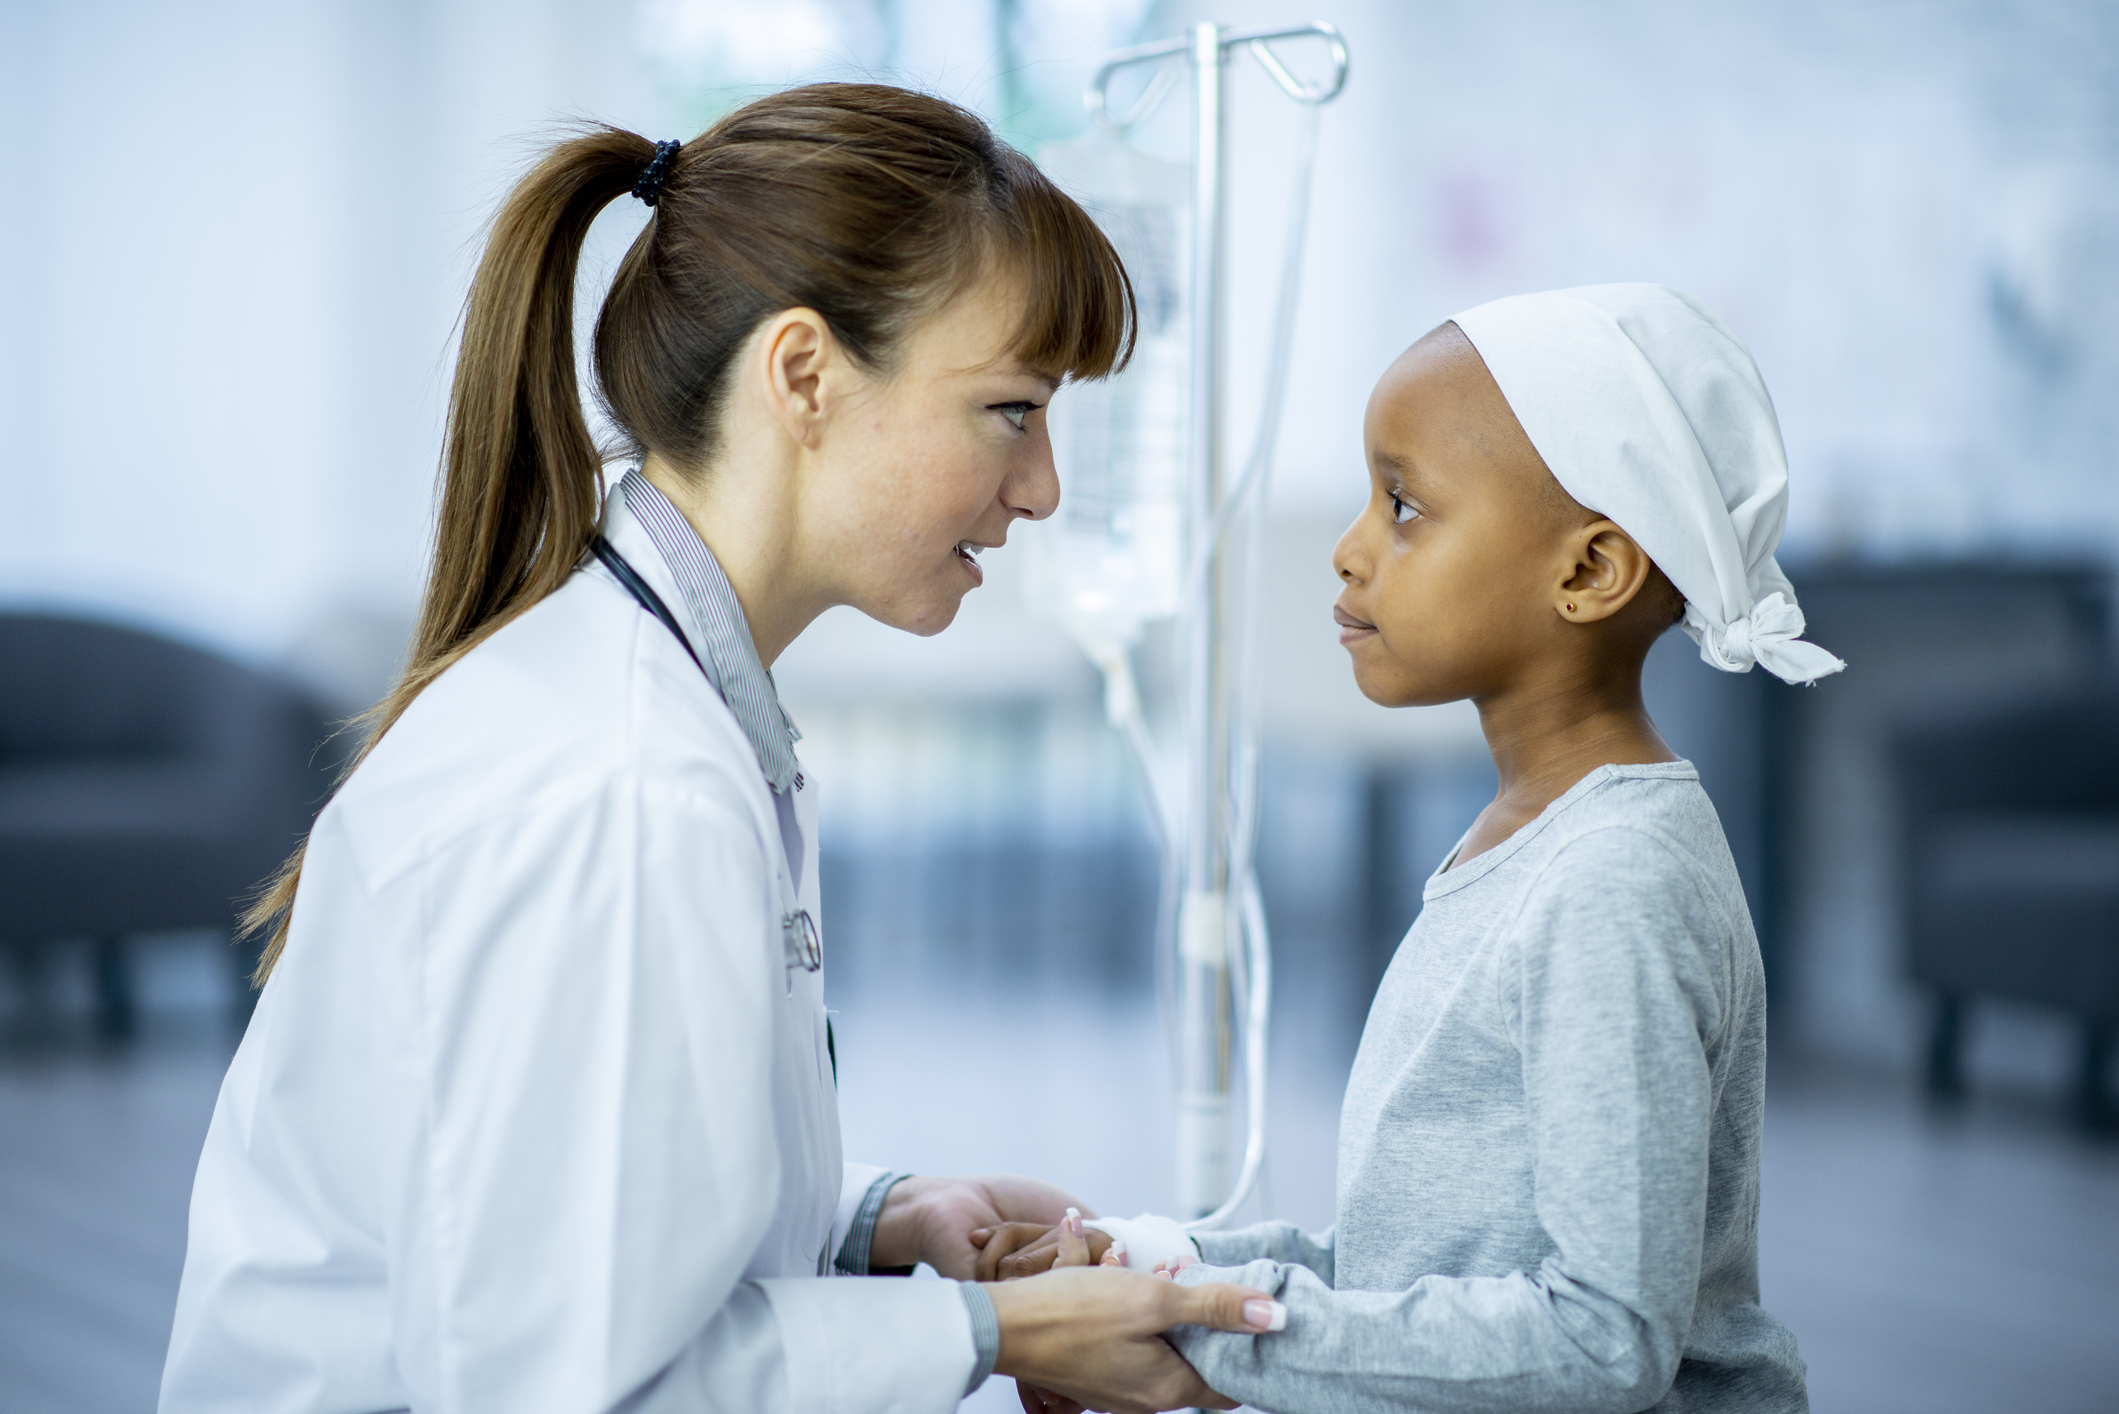 A female doctor and cancer patient are indoors in a hospital room. The doctor is holding the girl's hands to comfort her.